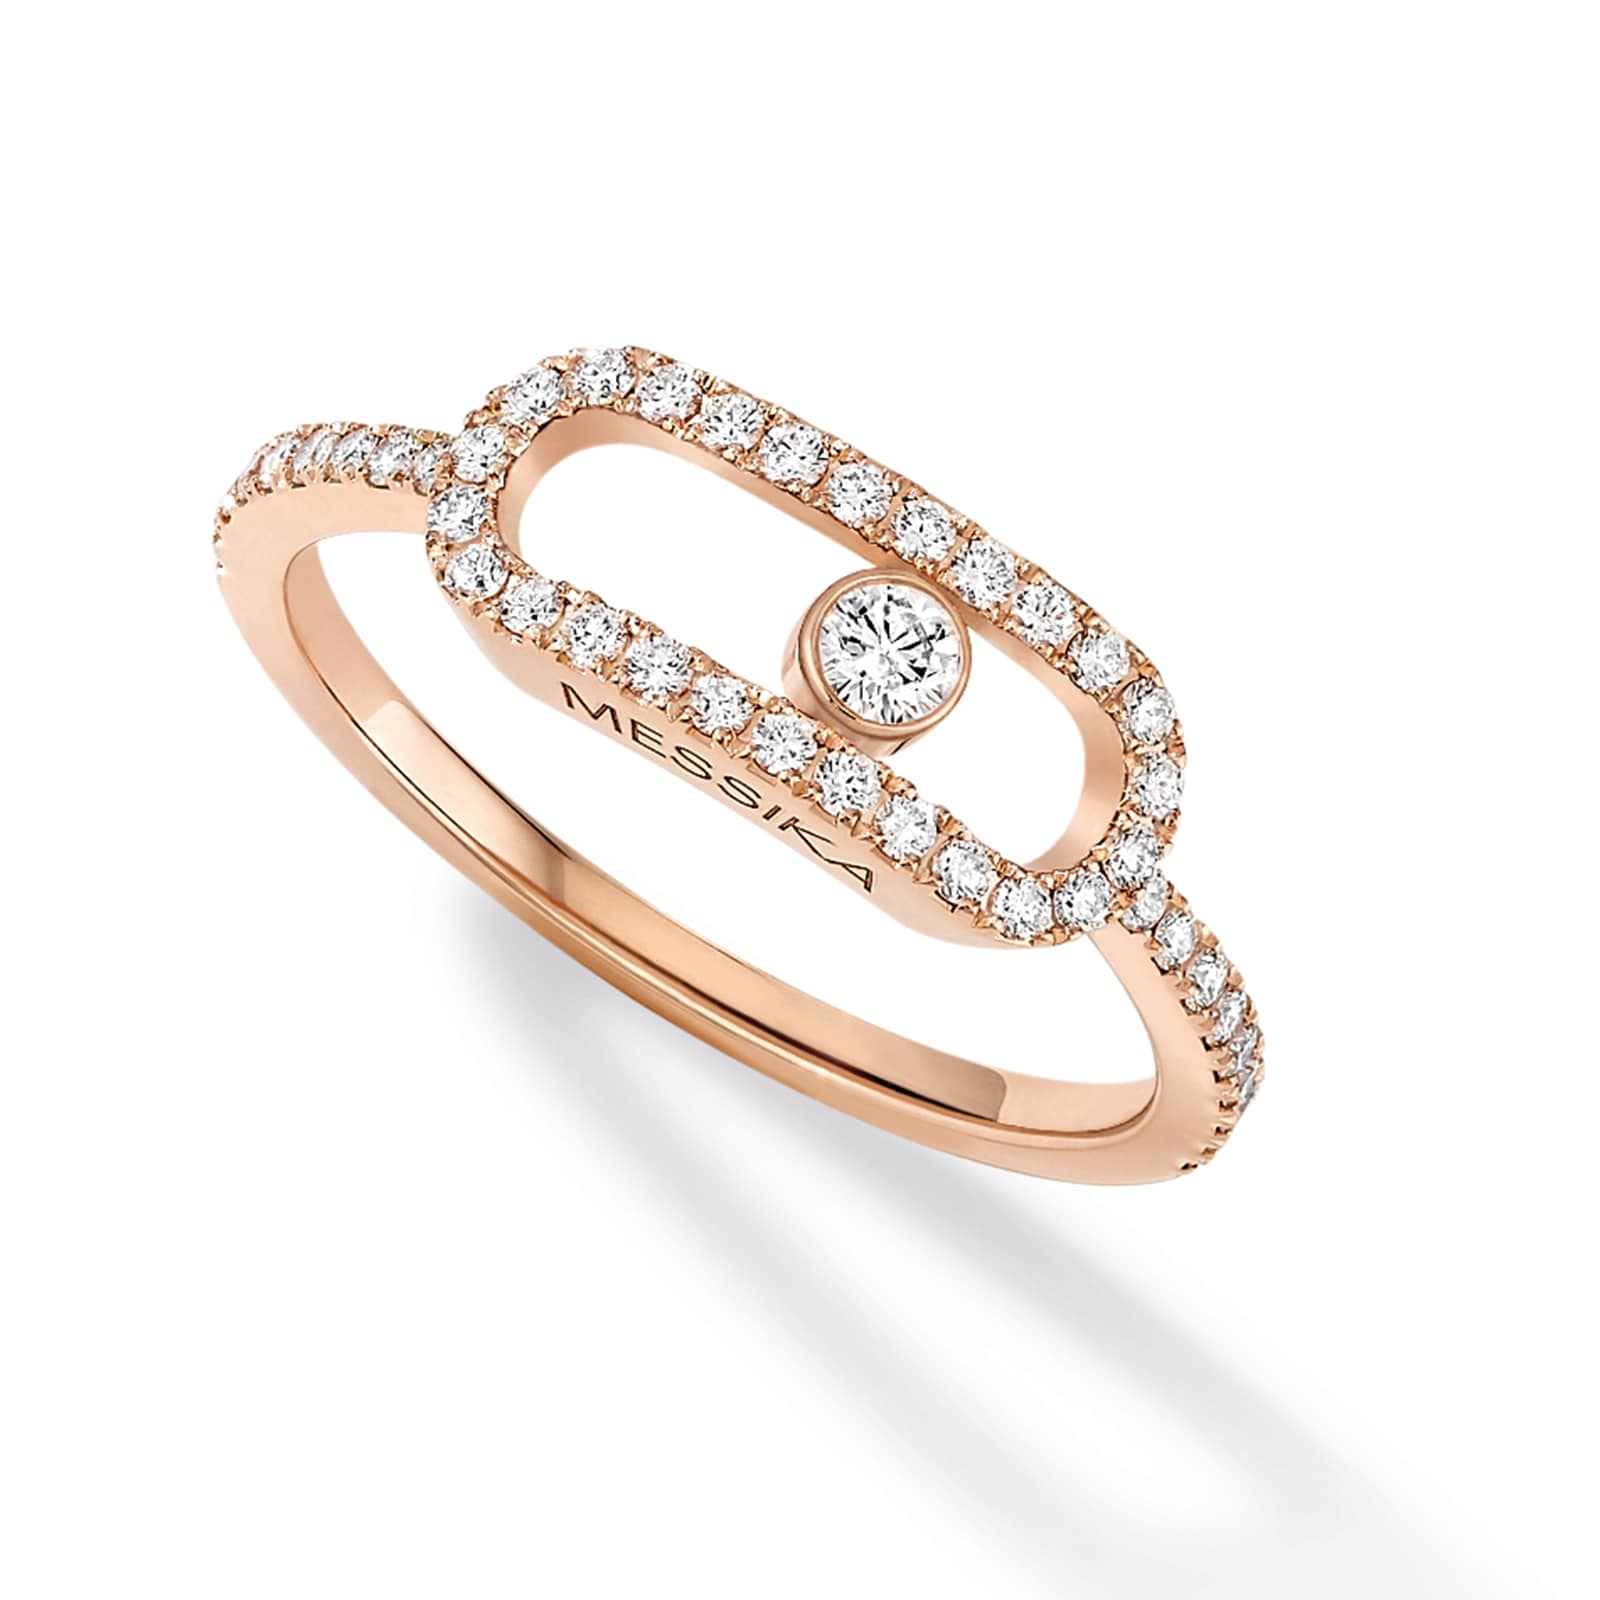 Messika 18k Rose Gold 0.31cttw Diamond Move Uno Ring Size 6.75 12113-PG-54  | Mayors